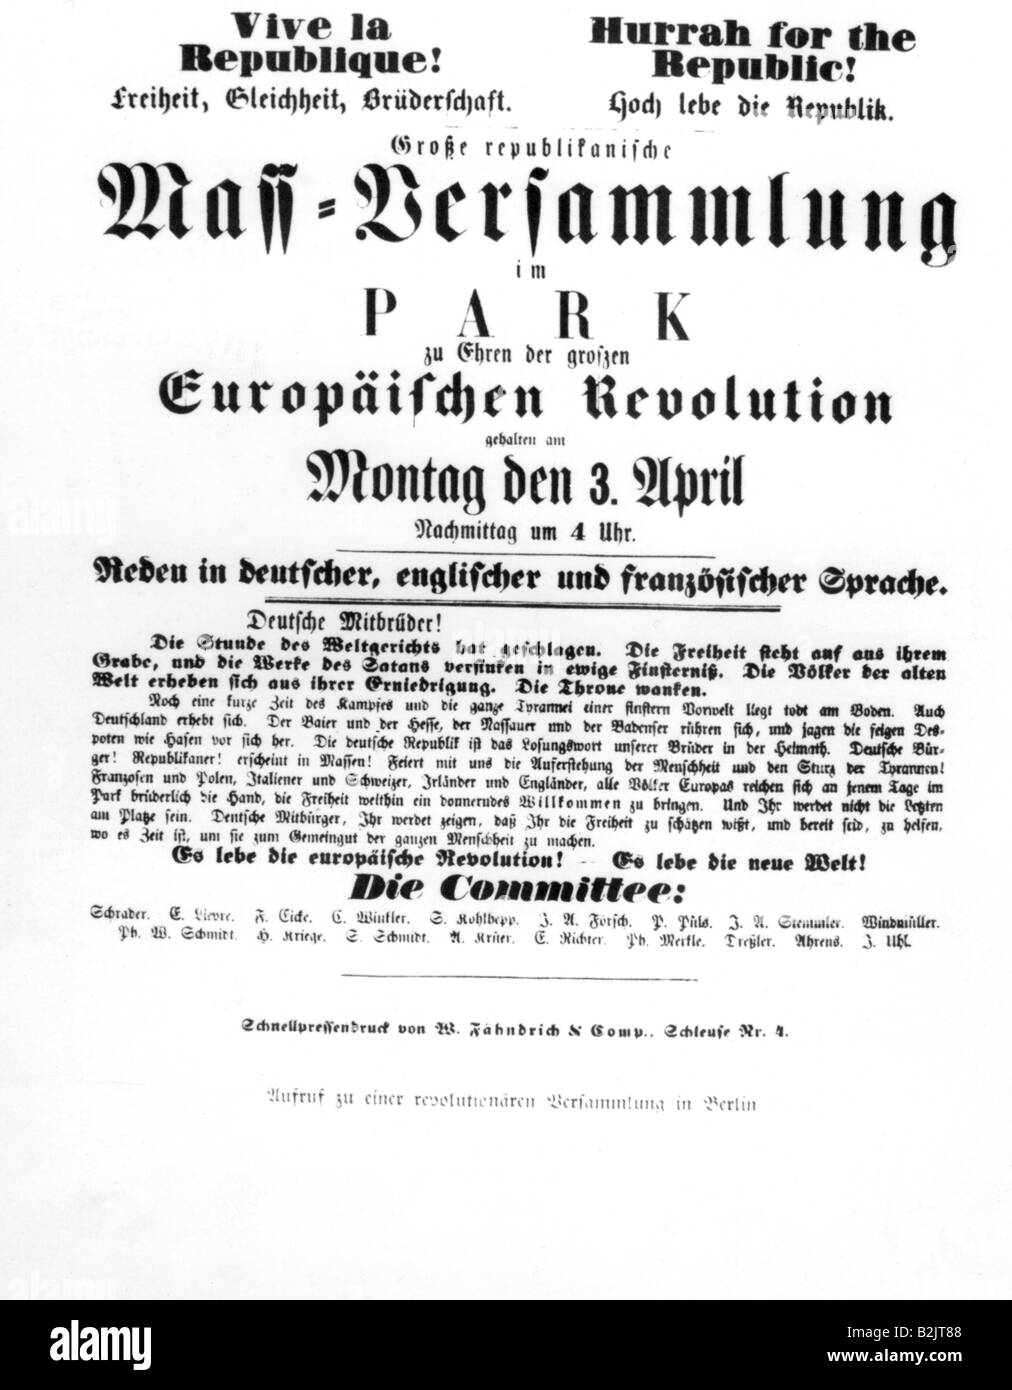 events, revolutions 1848 - 1849, Germany, Prussia, poster, mass meeting in Berlin, 3.4.1848,  Europeanm revolution, 19th century, historic, historical, Stock Photo